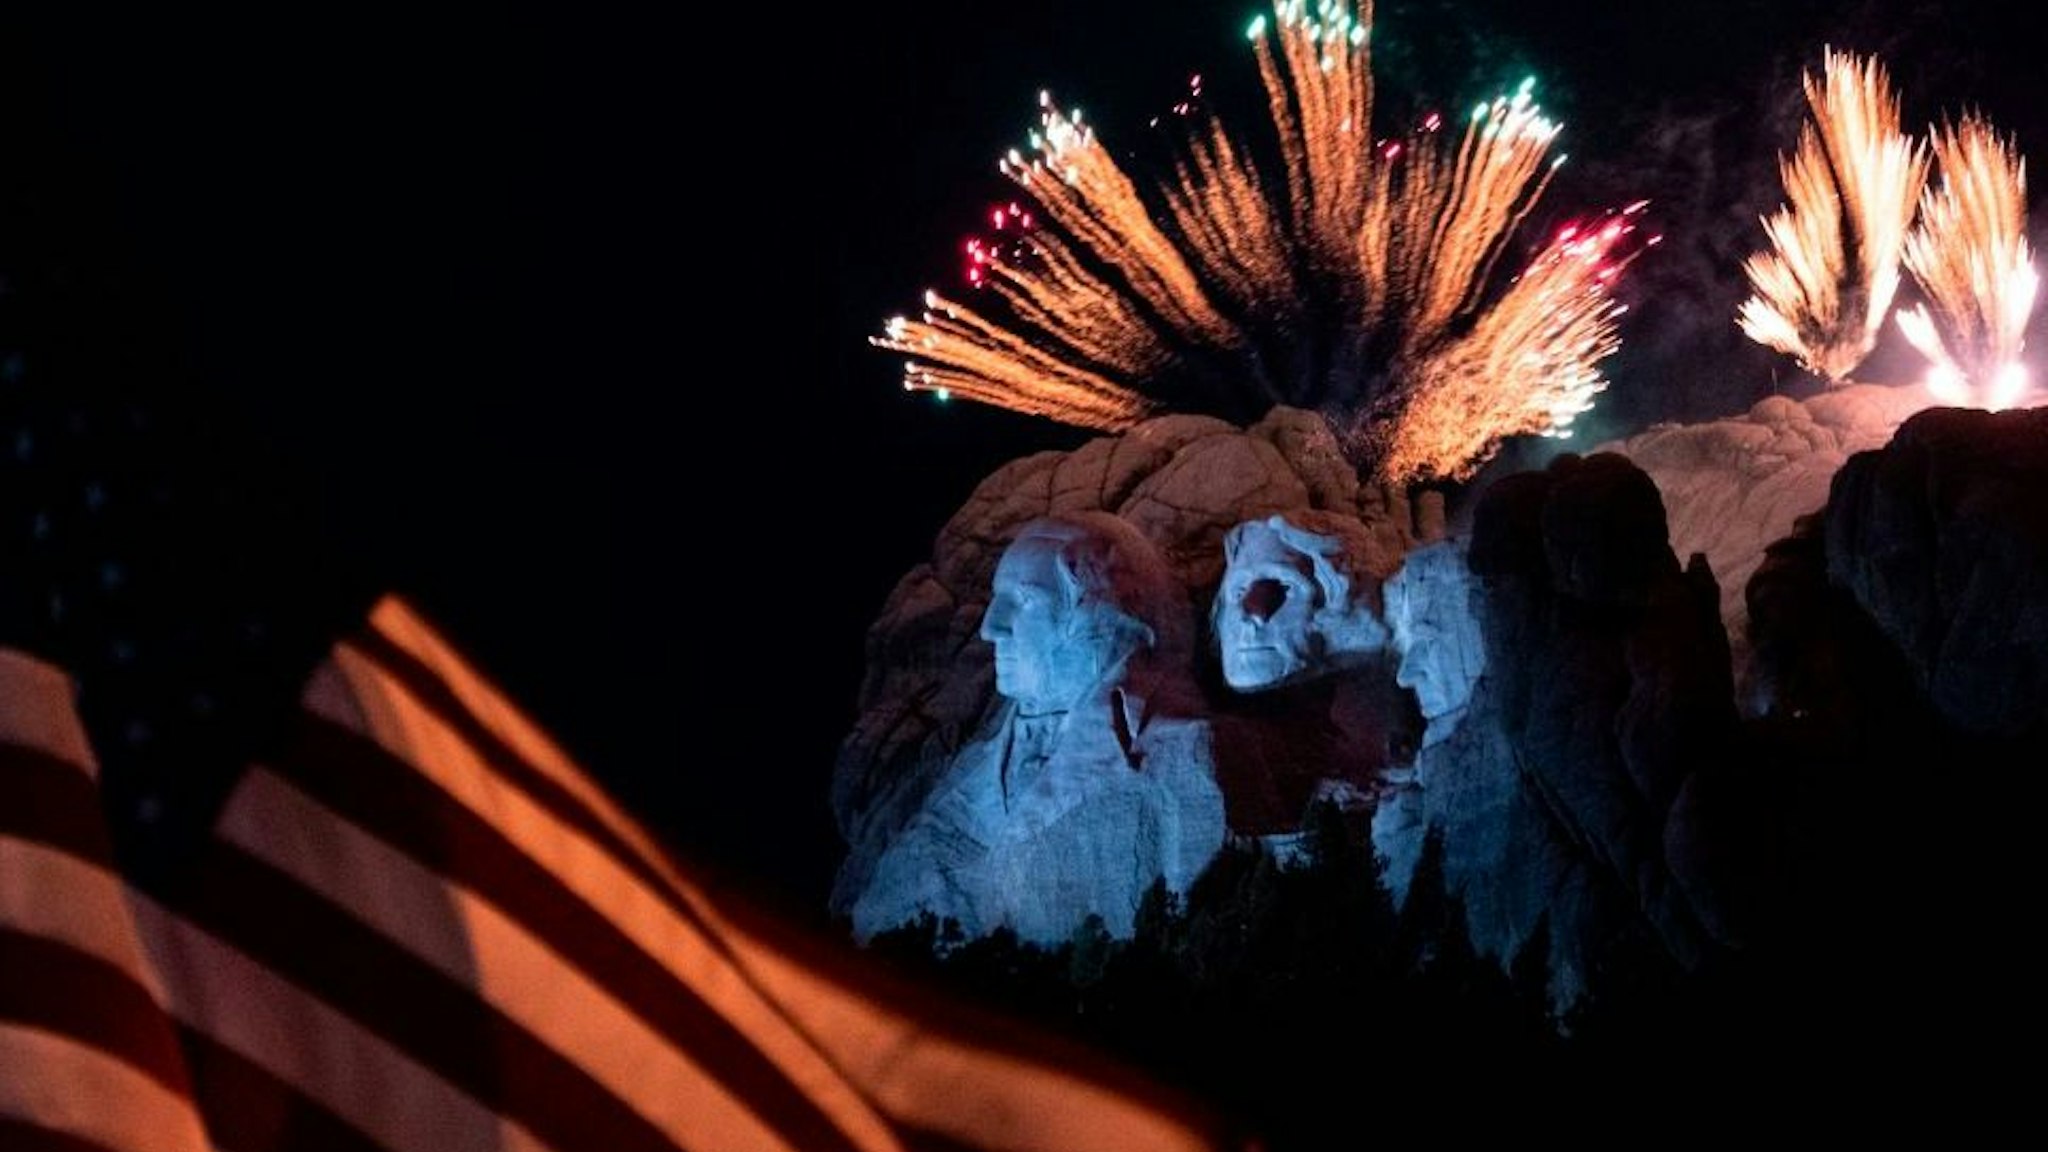 A US flag flies as fireworks explode above the Mount Rushmore National Monument during an Independence Day event attended by the US president in Keystone, South Dakota, July 3, 2020. (Photo by ANDREW CABALLERO-REYNOLDS / AFP)